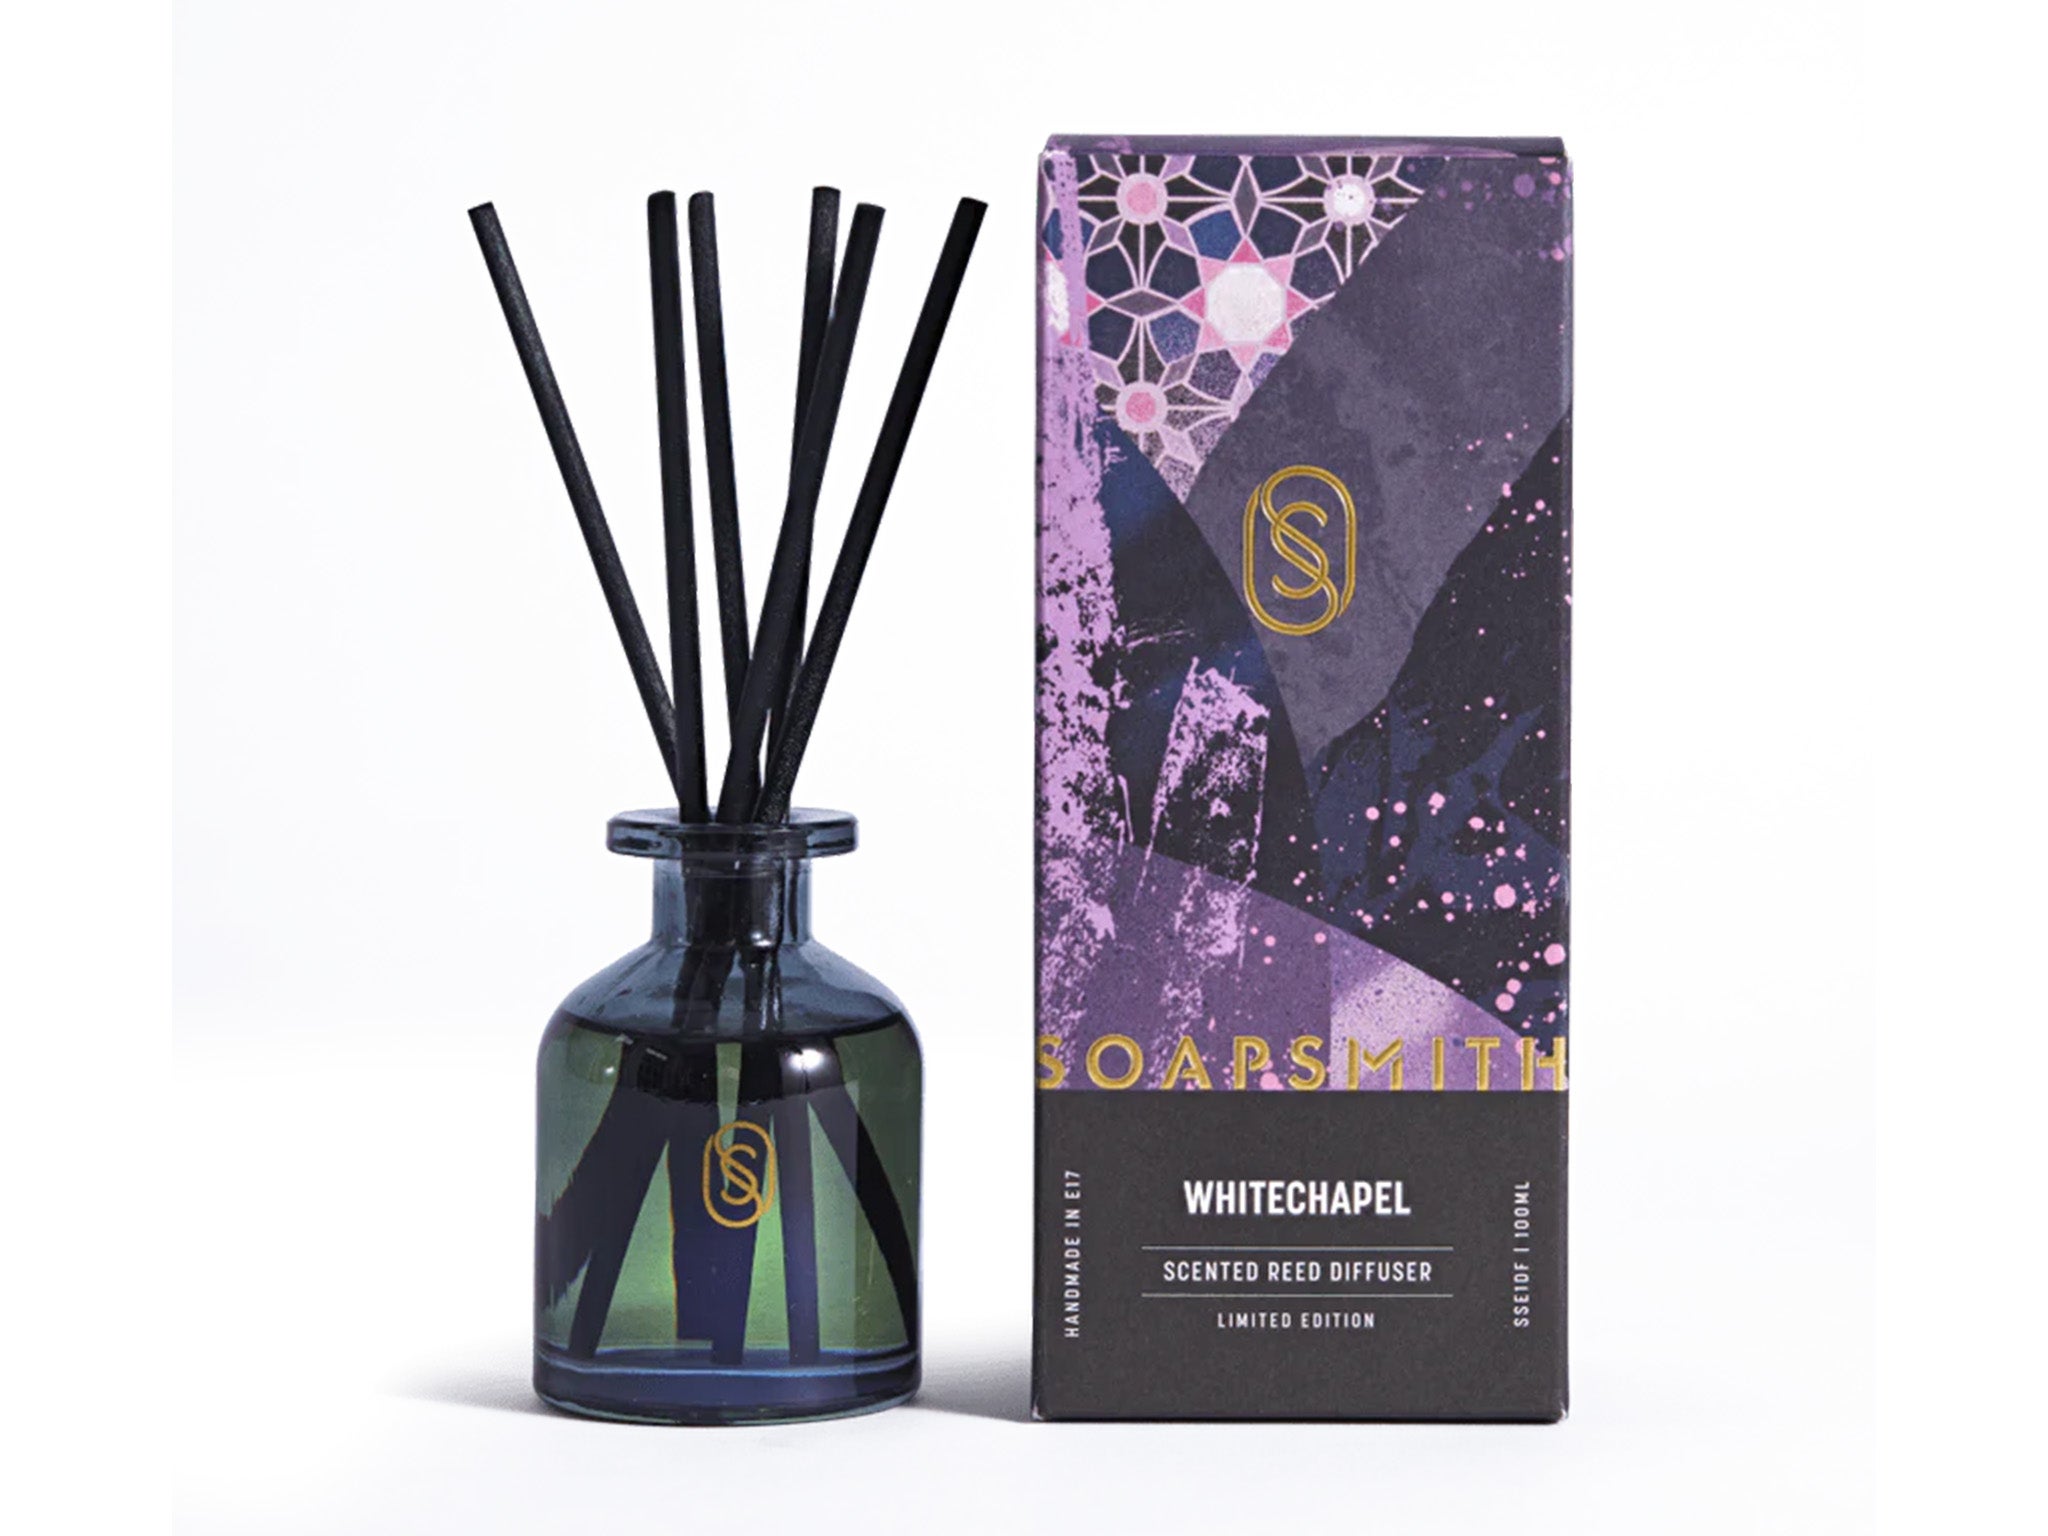 Soapsmith Whitechapel scented reed diffuser